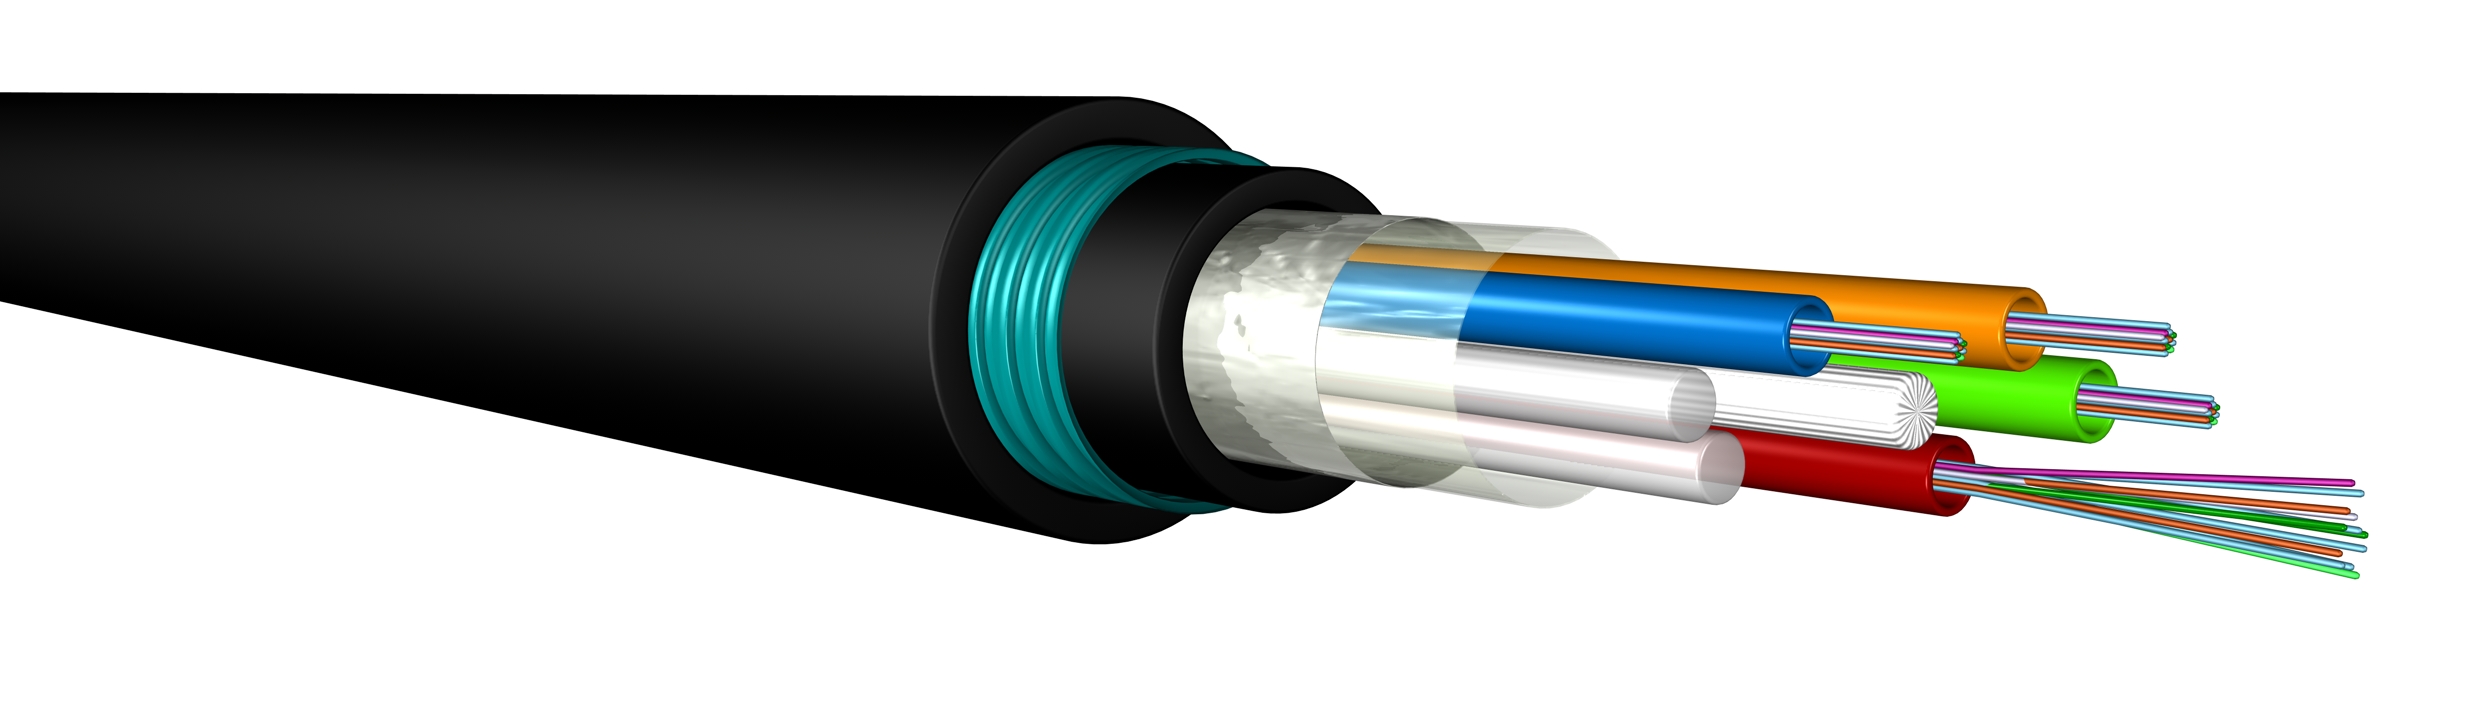 I14: UCFIBRE™ Universal Stranded Loose Tube Armoured Cable